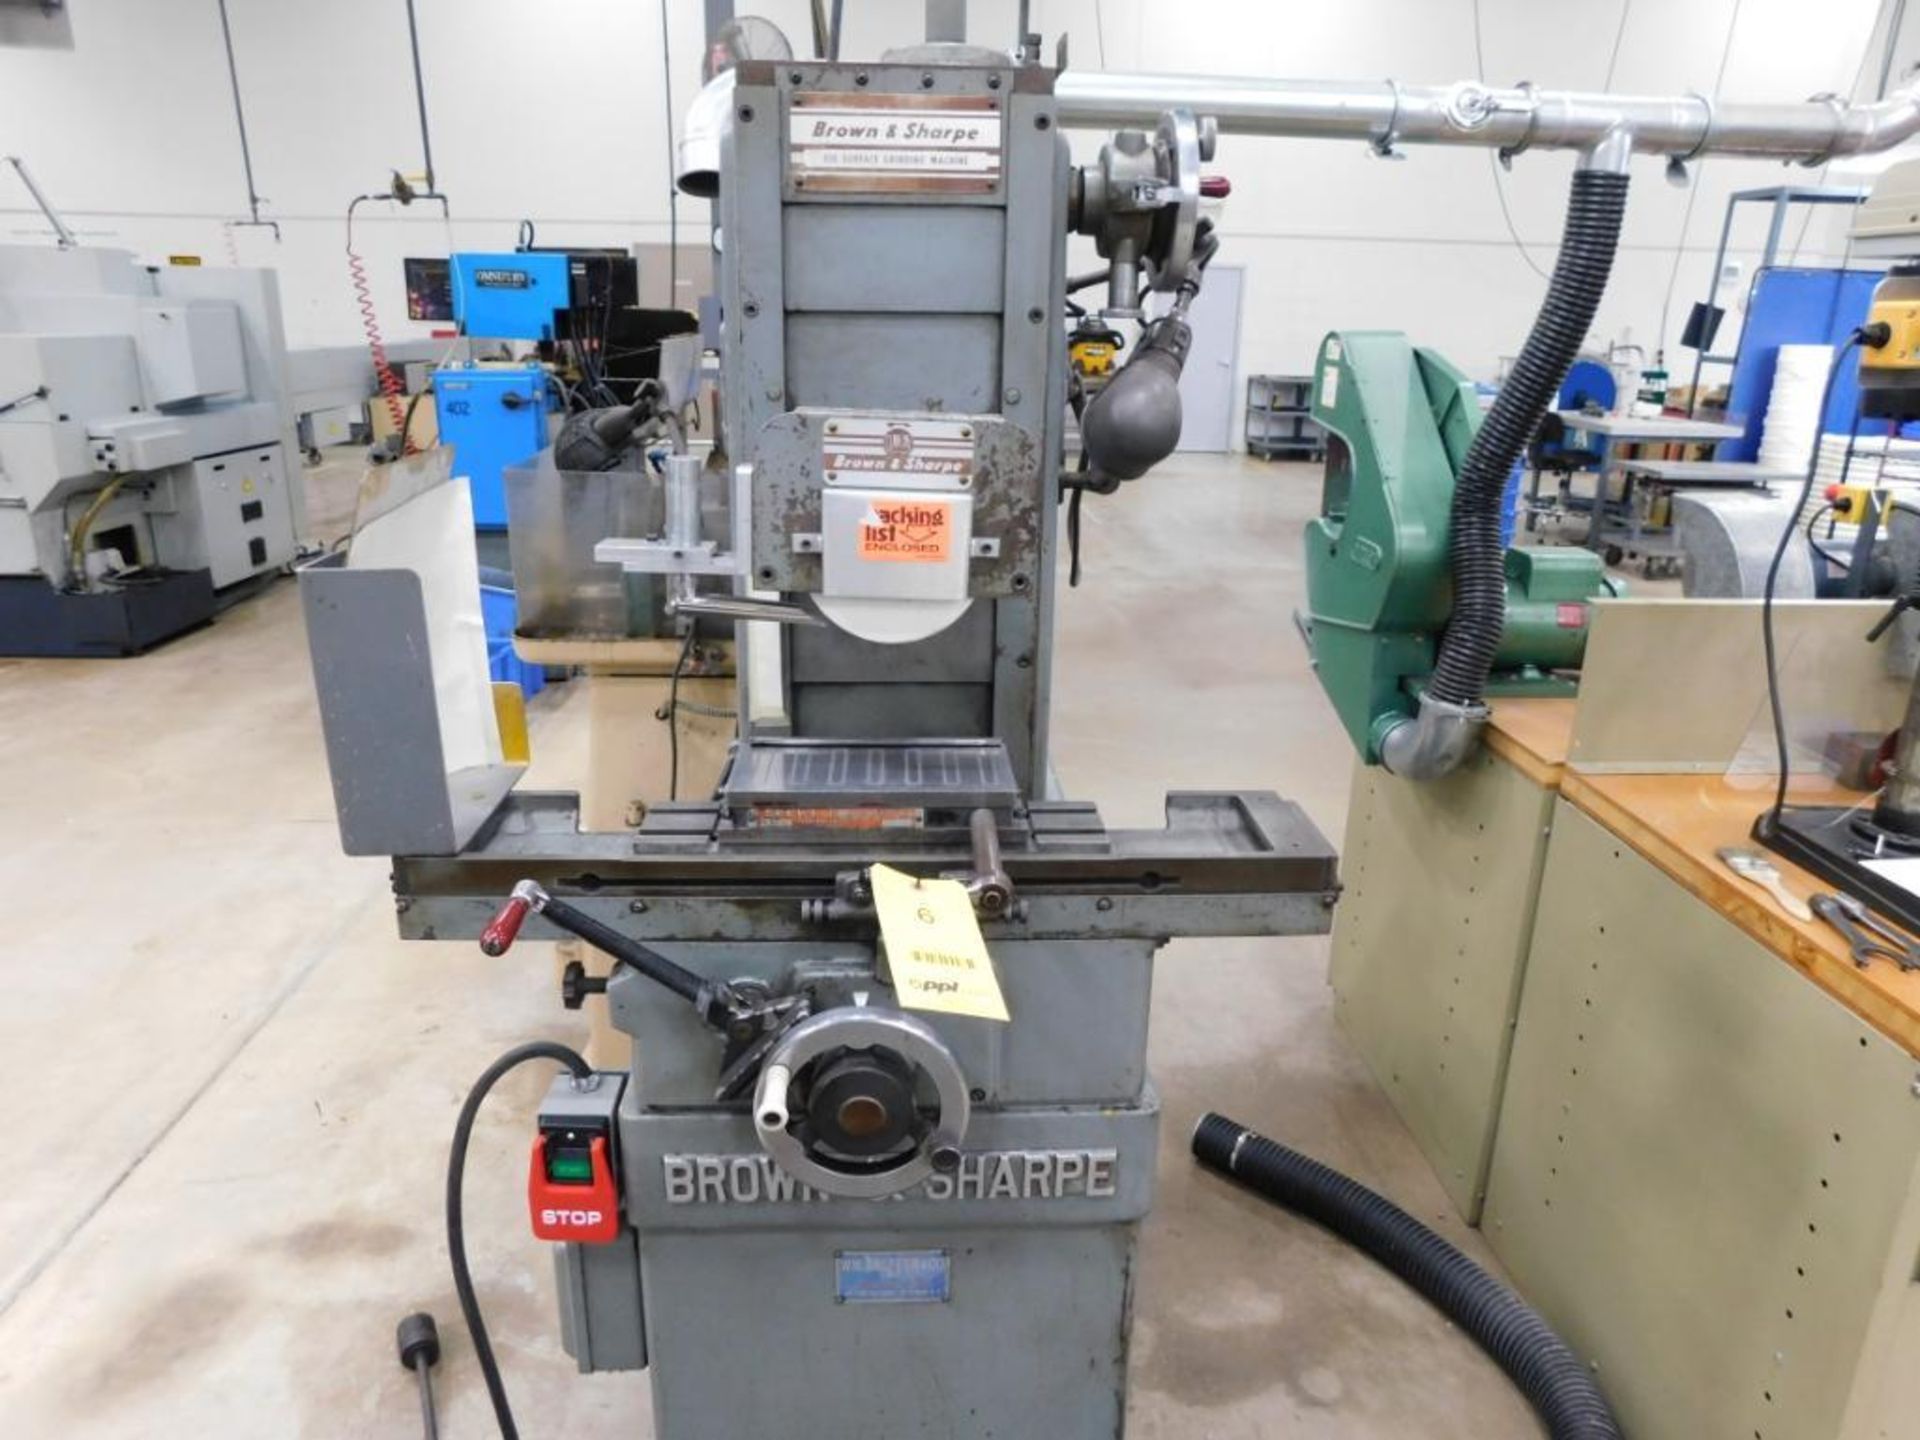 Brown & Sharpe Surface Grinder Model 510, S/N 523-510-313, with Magnetic Chuck - Image 2 of 2